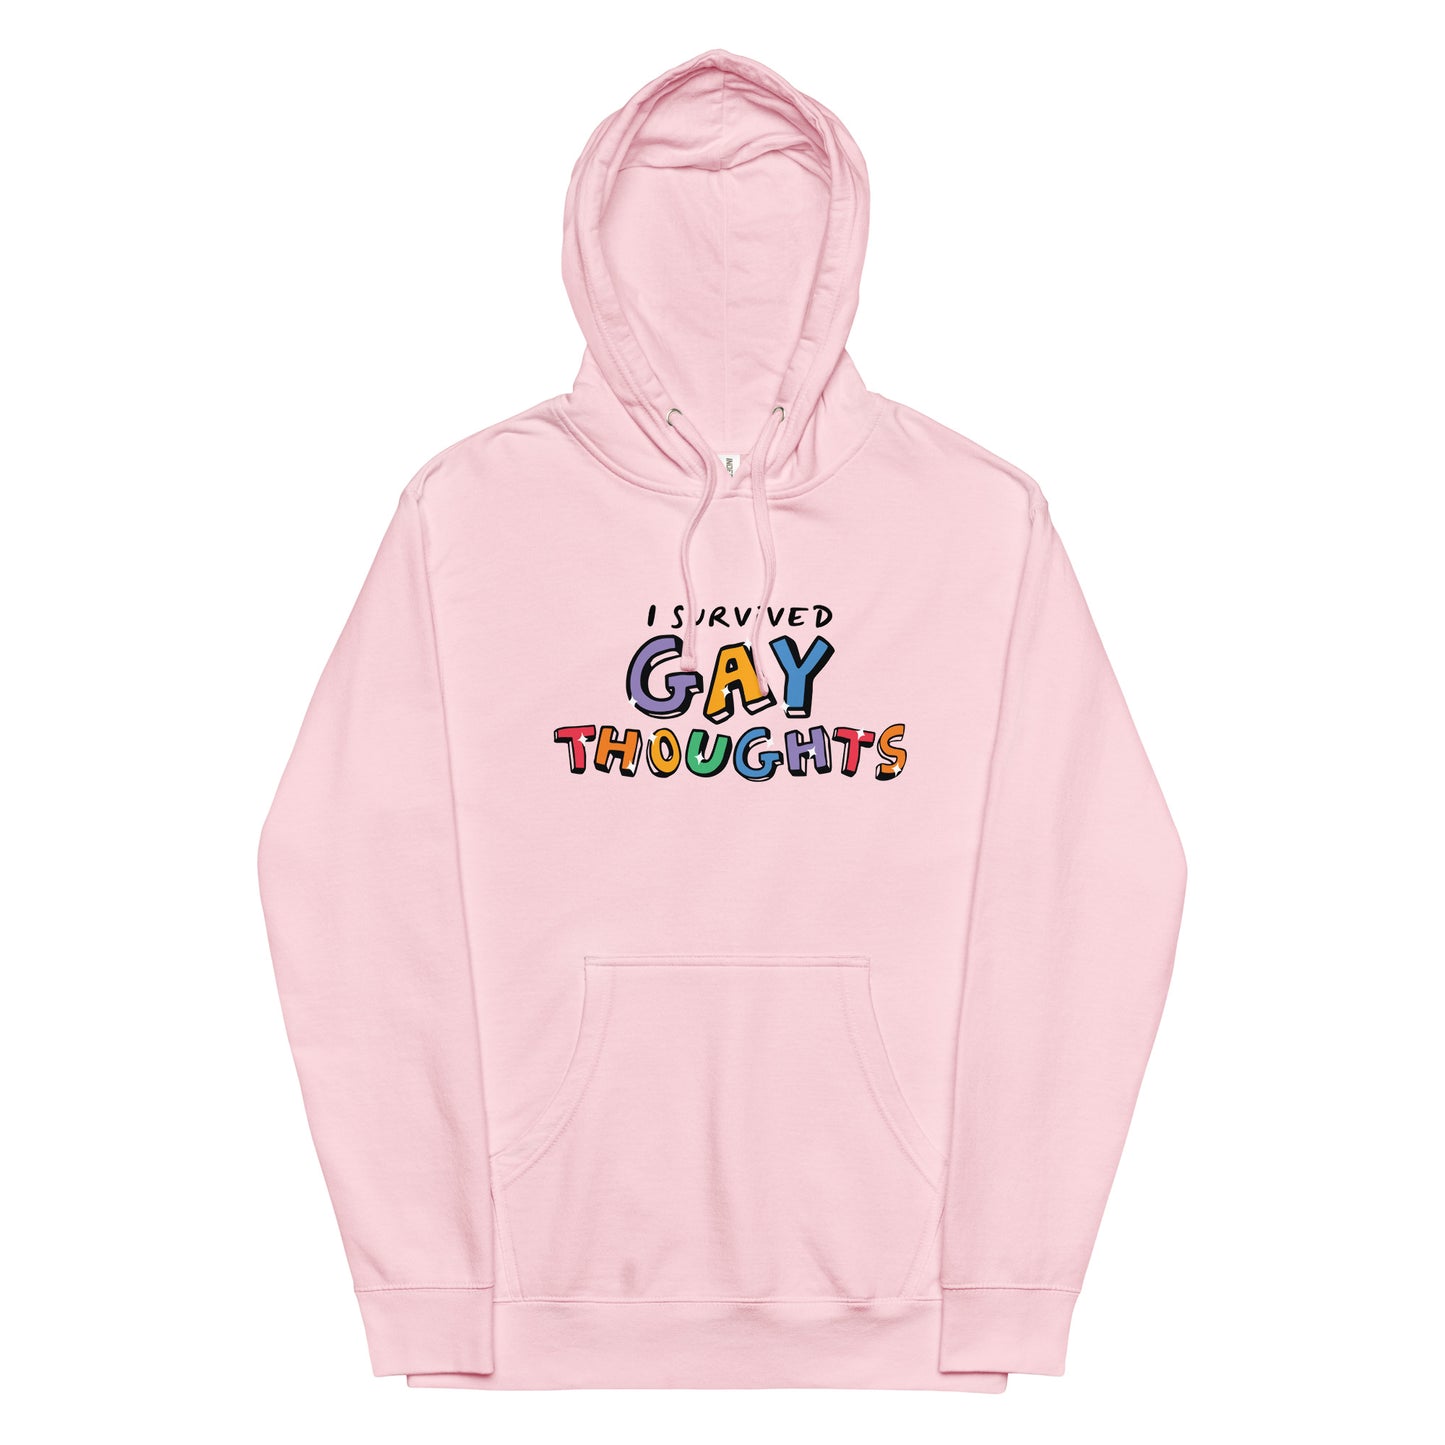 I Survived Gay Thoughts Unisex hoodie